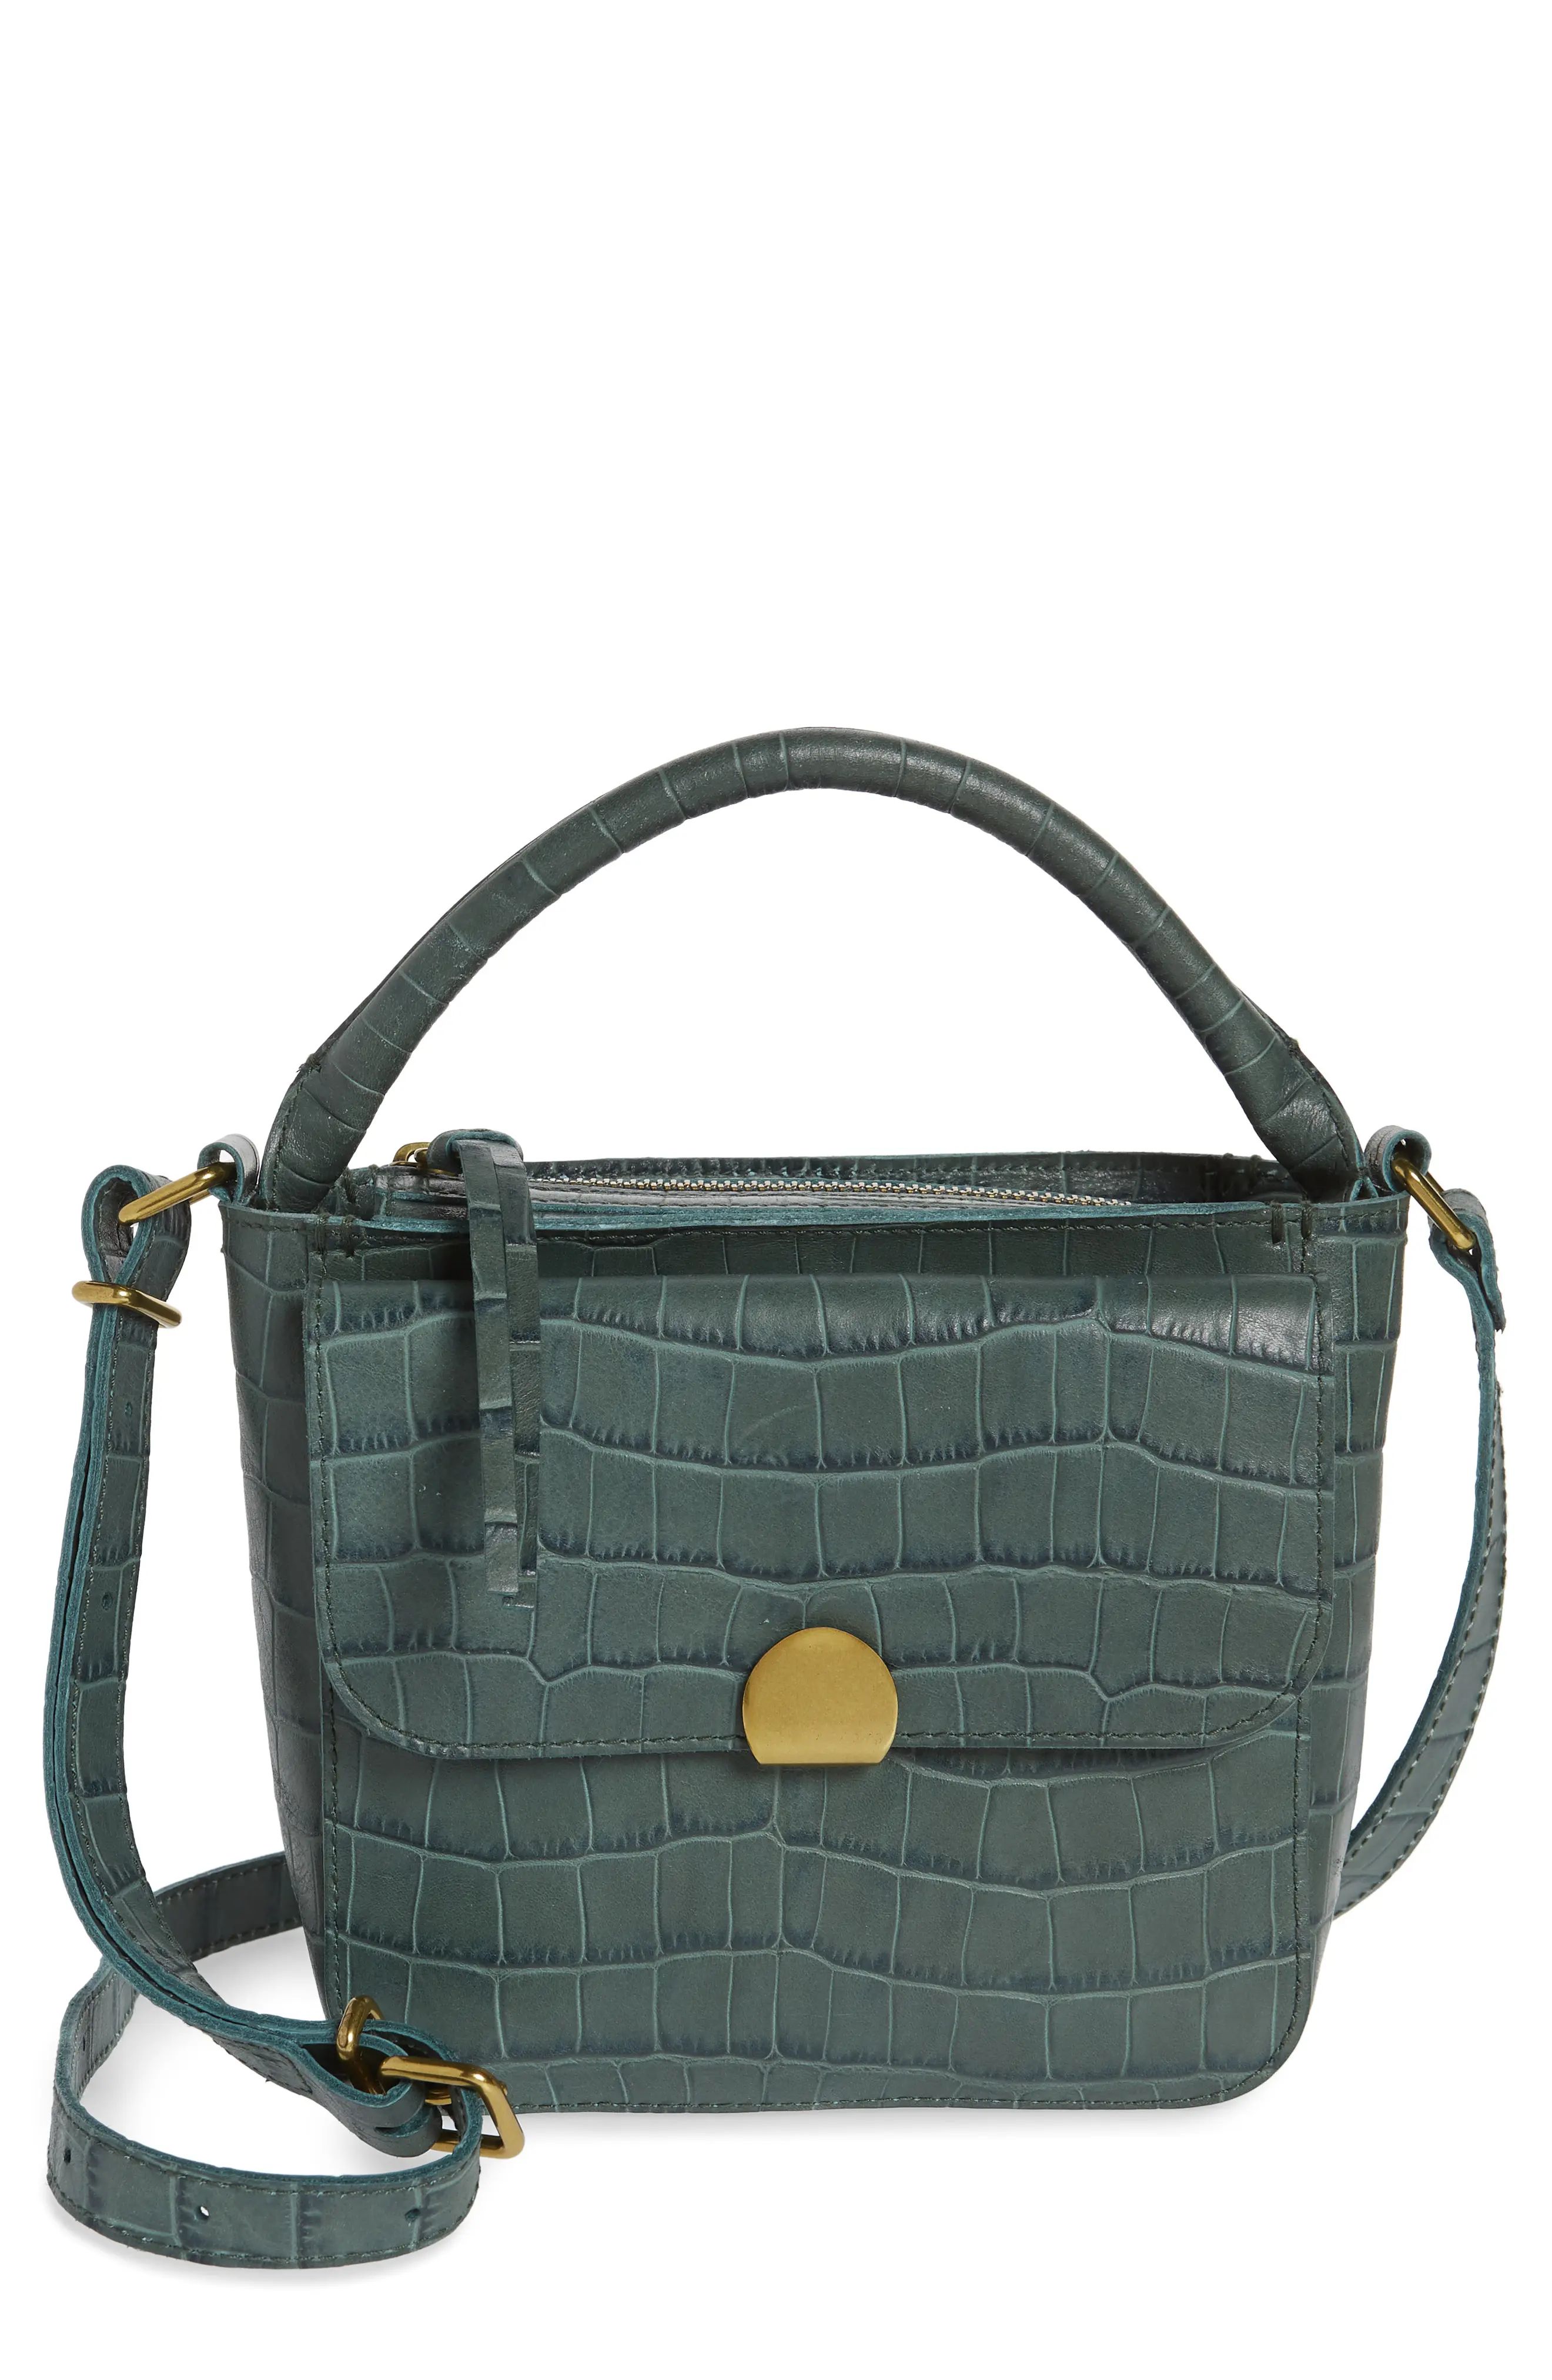 Madewell The Mini Abroad Crossbody Bag: Croc Embossed Leather Edition - Green | Nordstrom